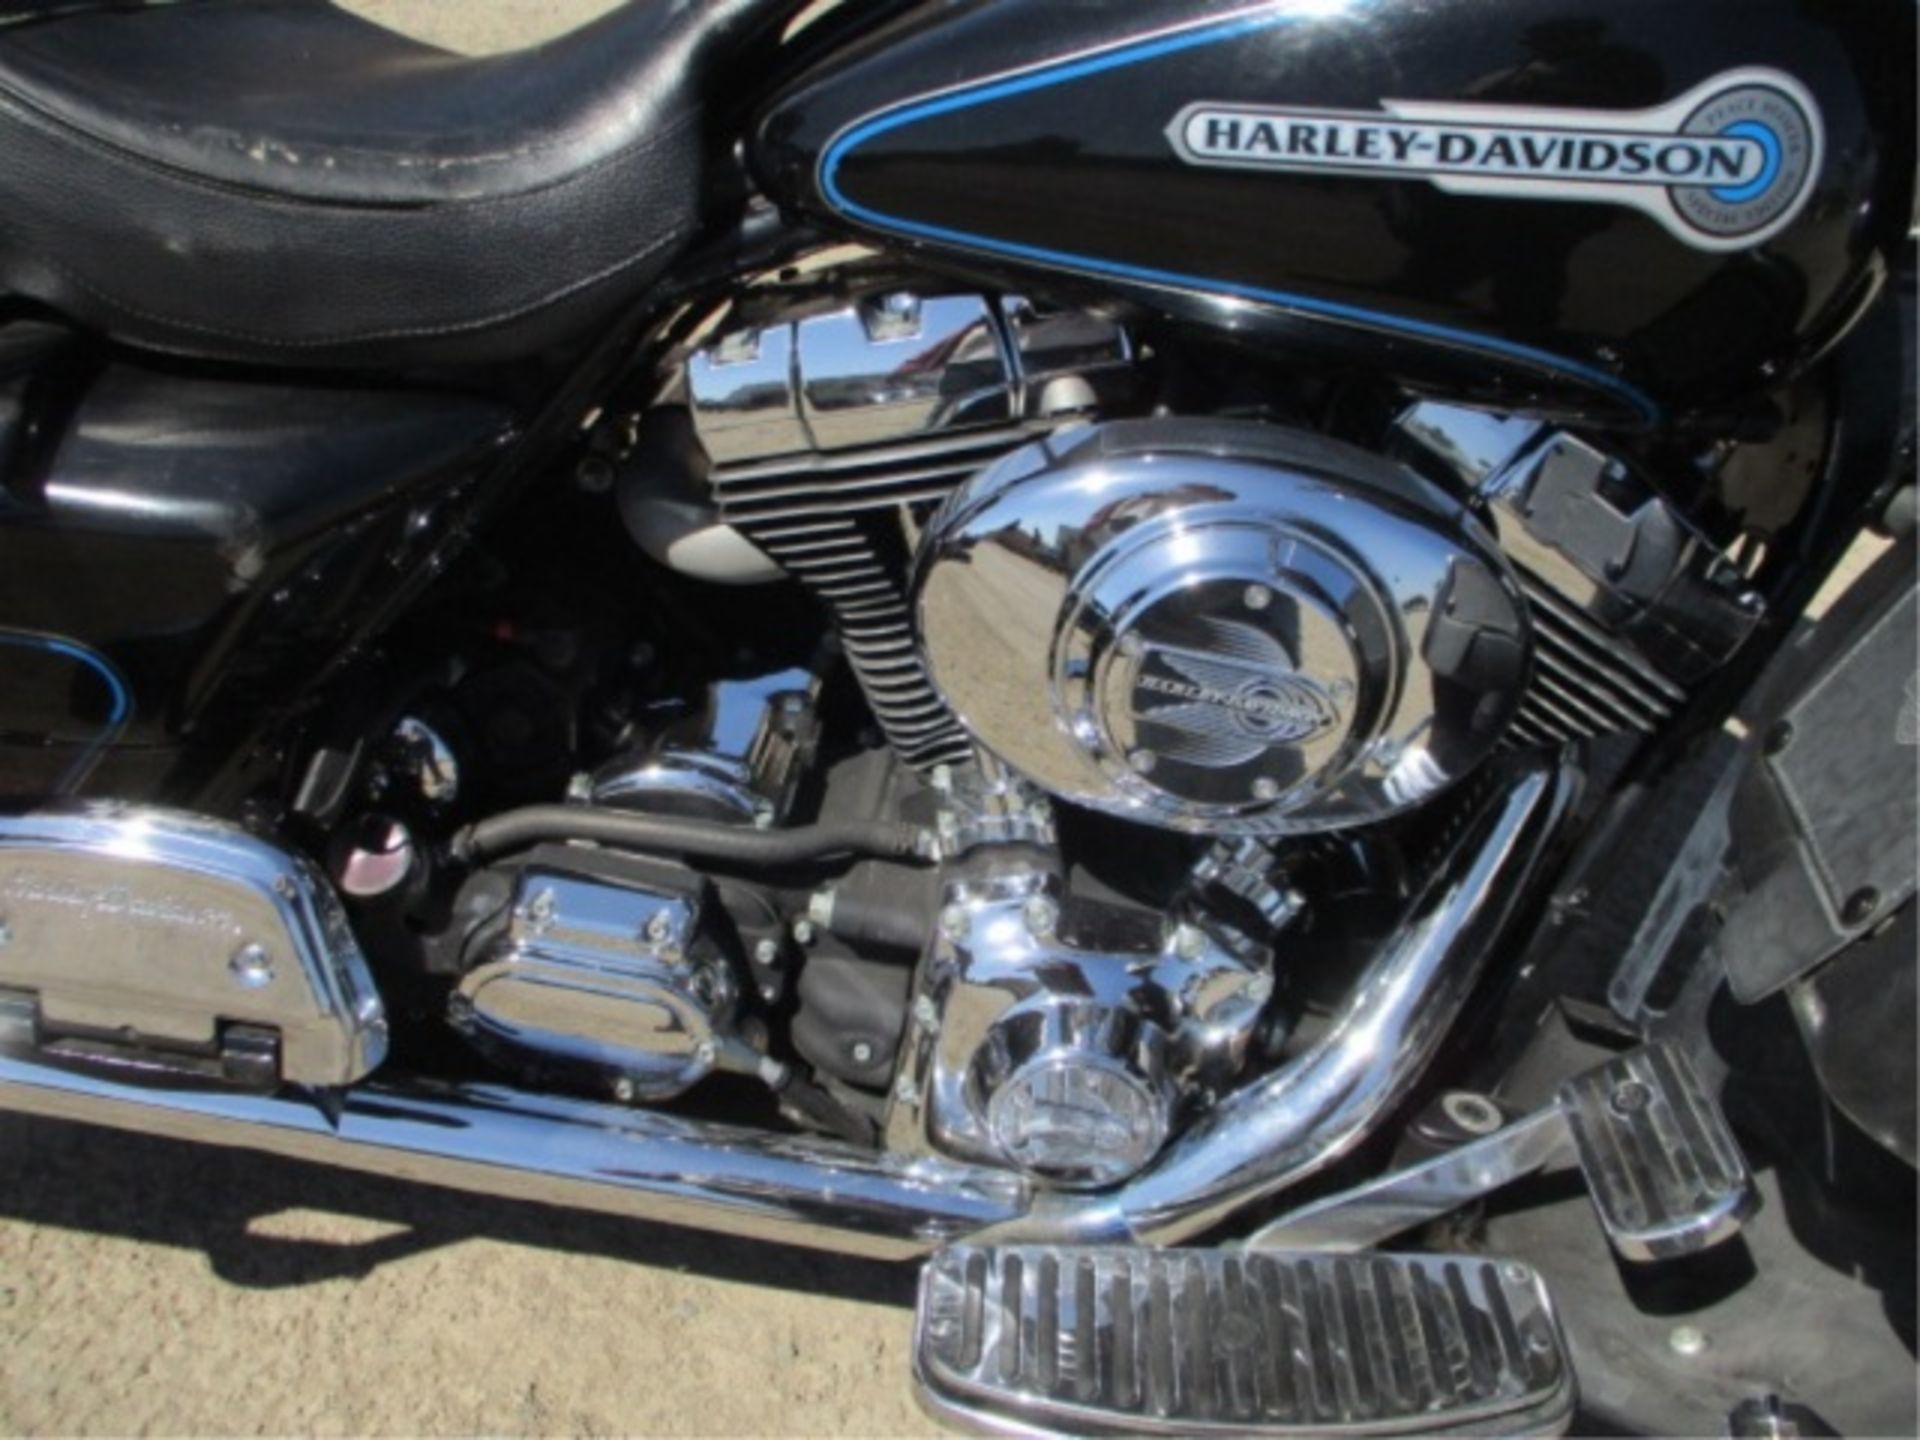 2006 Harley Davidson Electra Glide Motor Cycle, Ultra Classic, 1450cc Gas, External Speakers, - Image 30 of 44